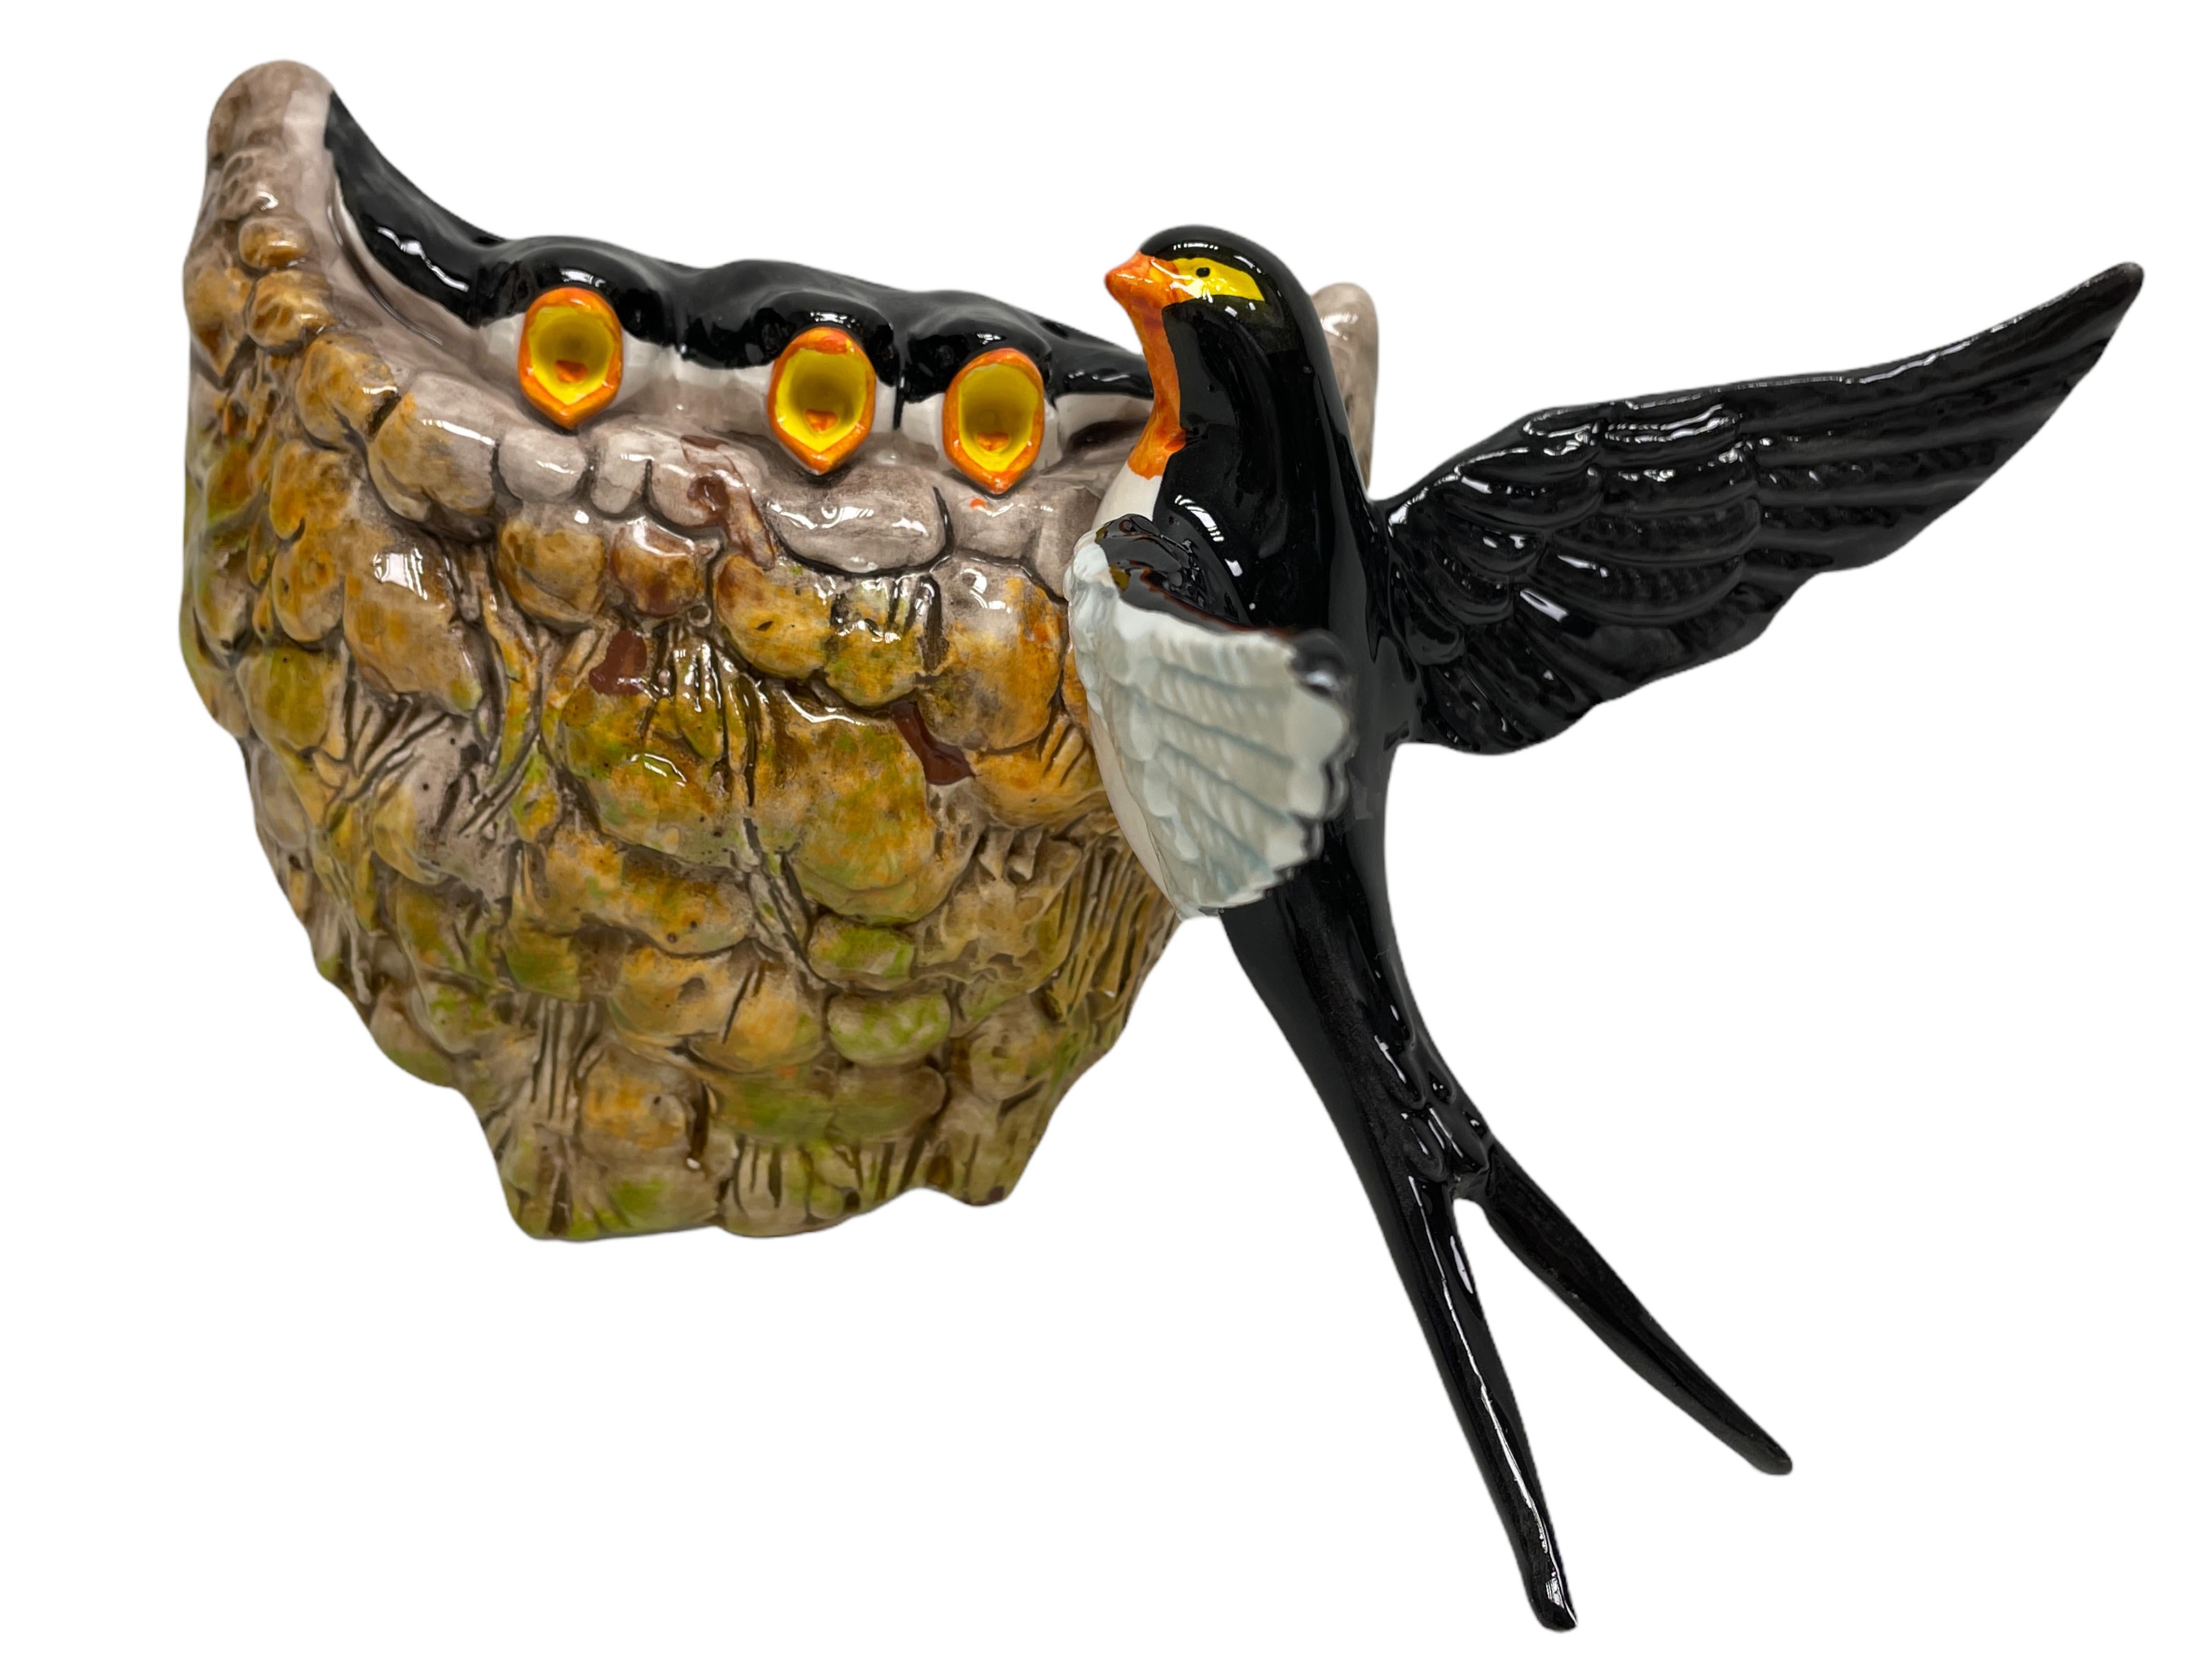 This beautiful black swallows, made and hand painted in Italy will make a nice addition to your room.
Made in Italy, about 1980s they are still a nice wall decoration.